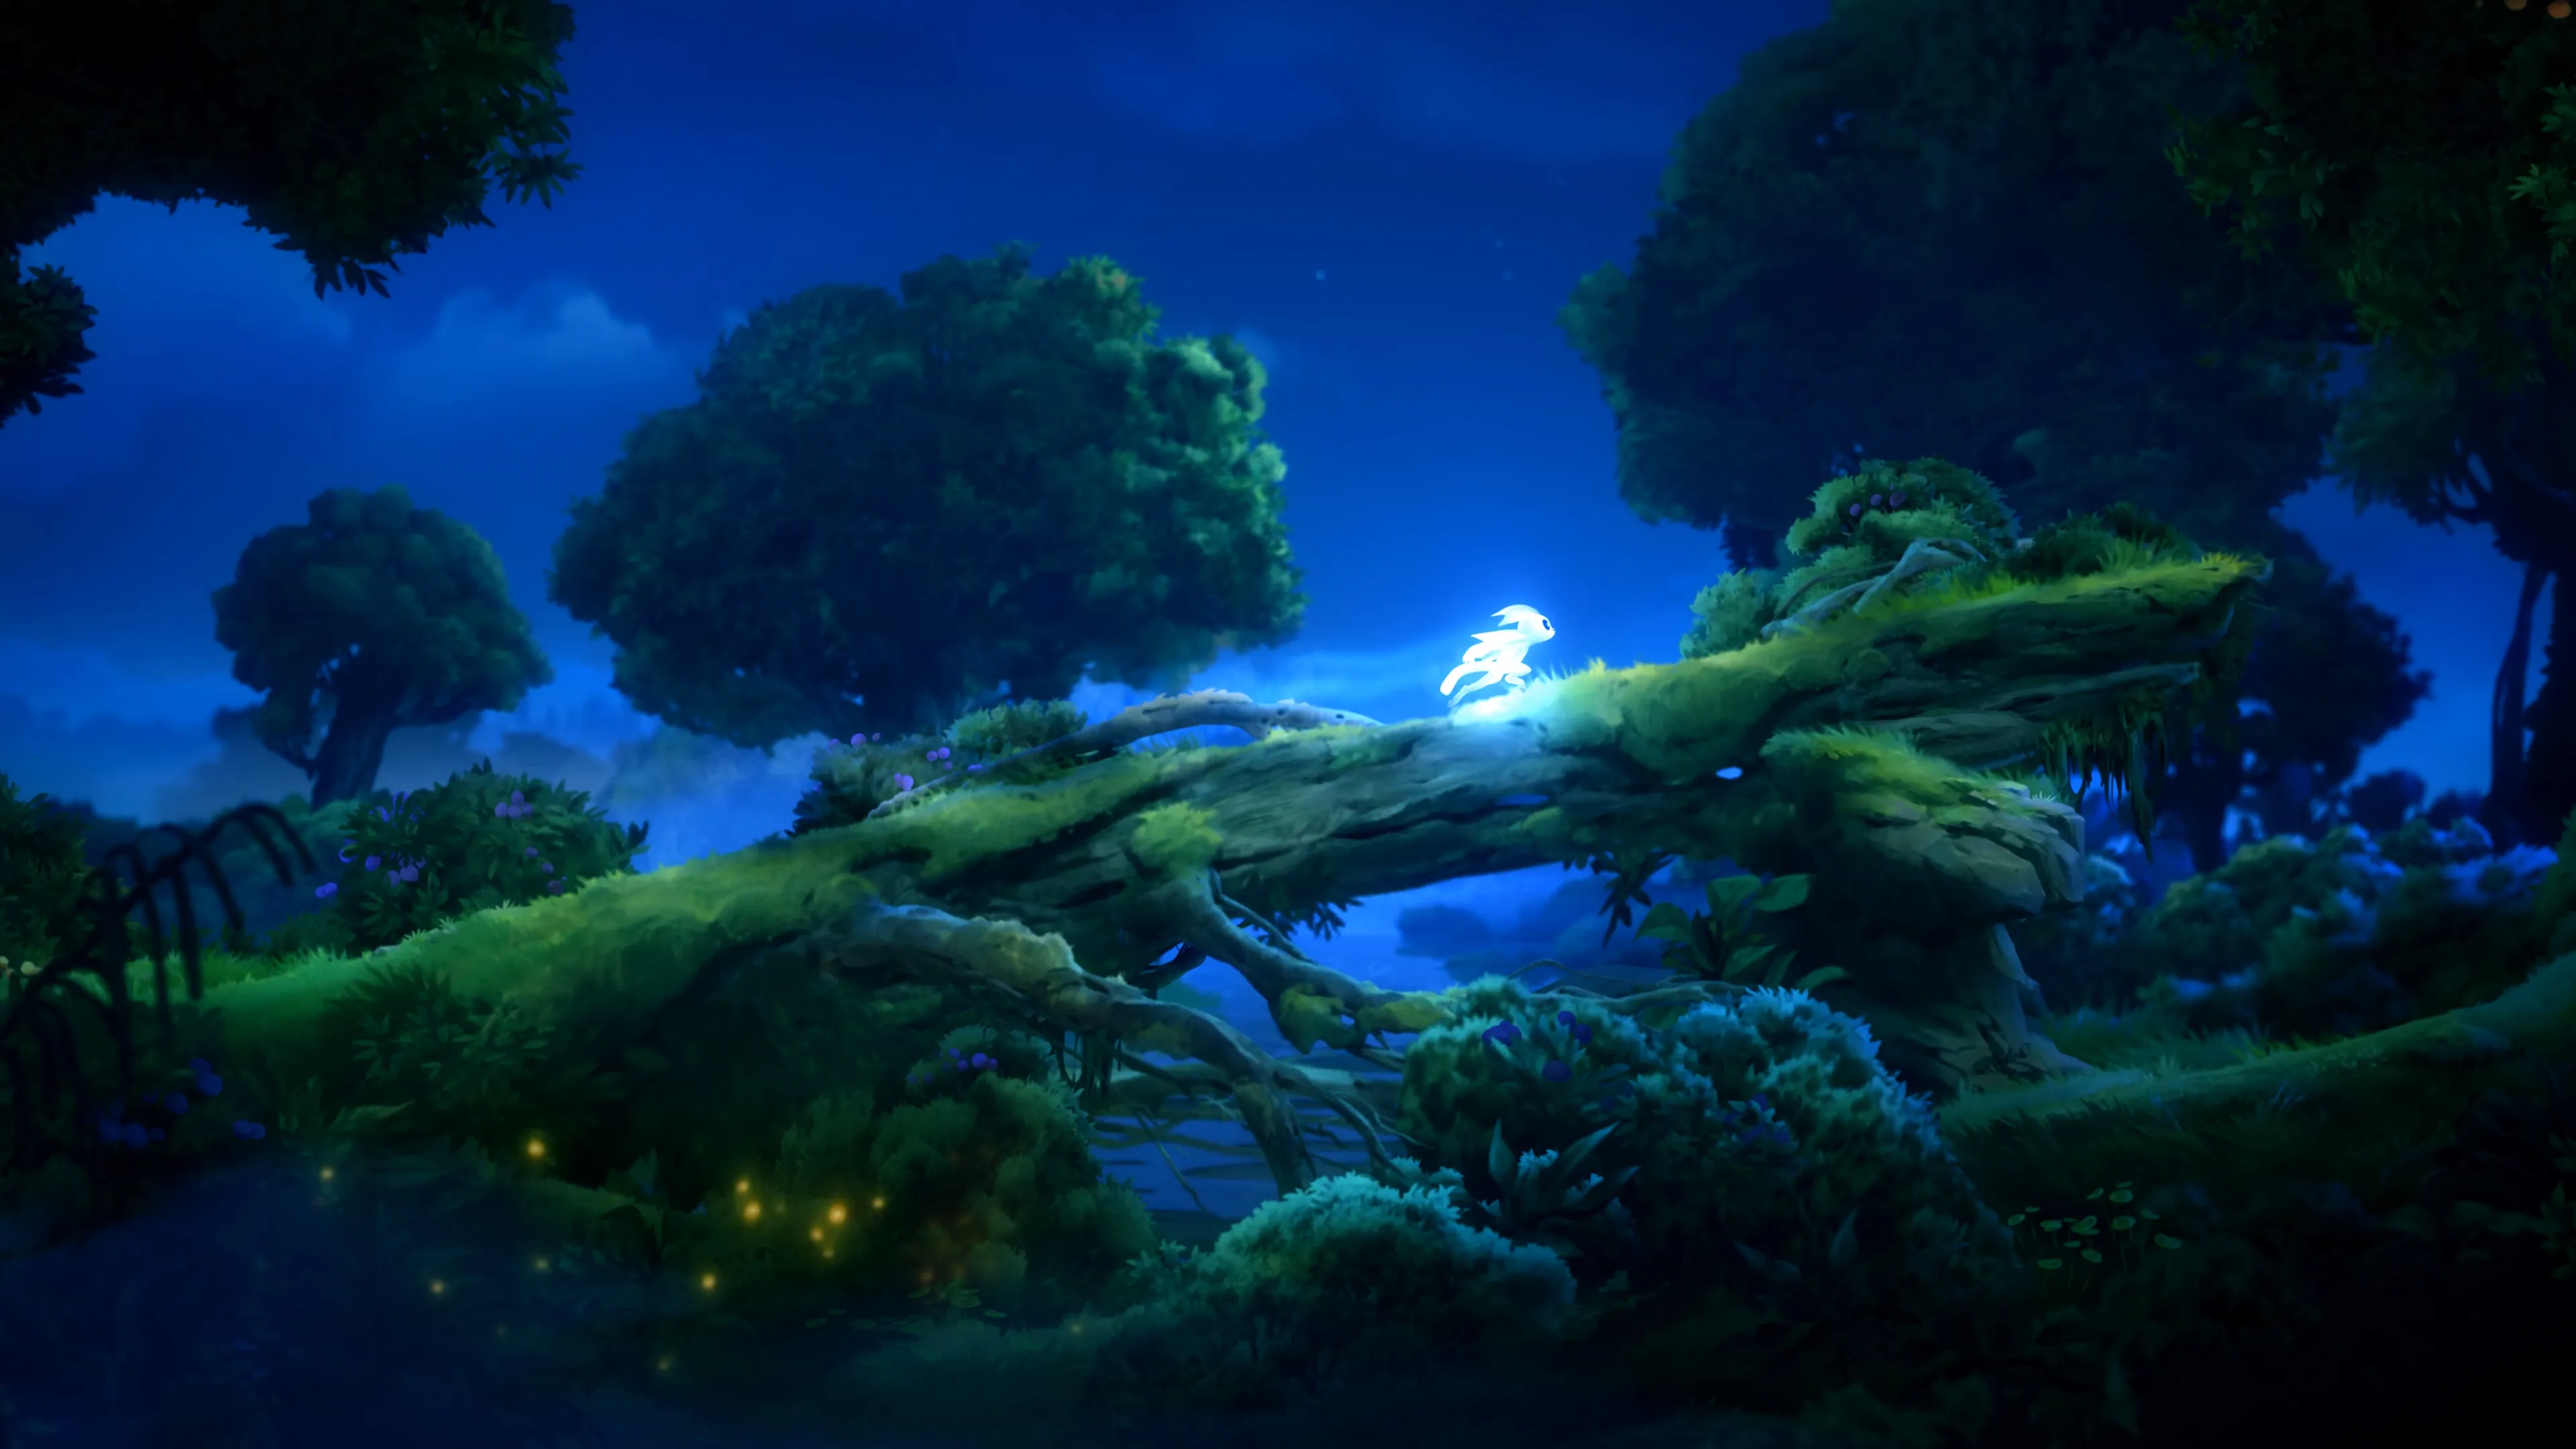 A screenshot of the Game "Ori and the Will of the Wisps" showing Ori on a tree trunk